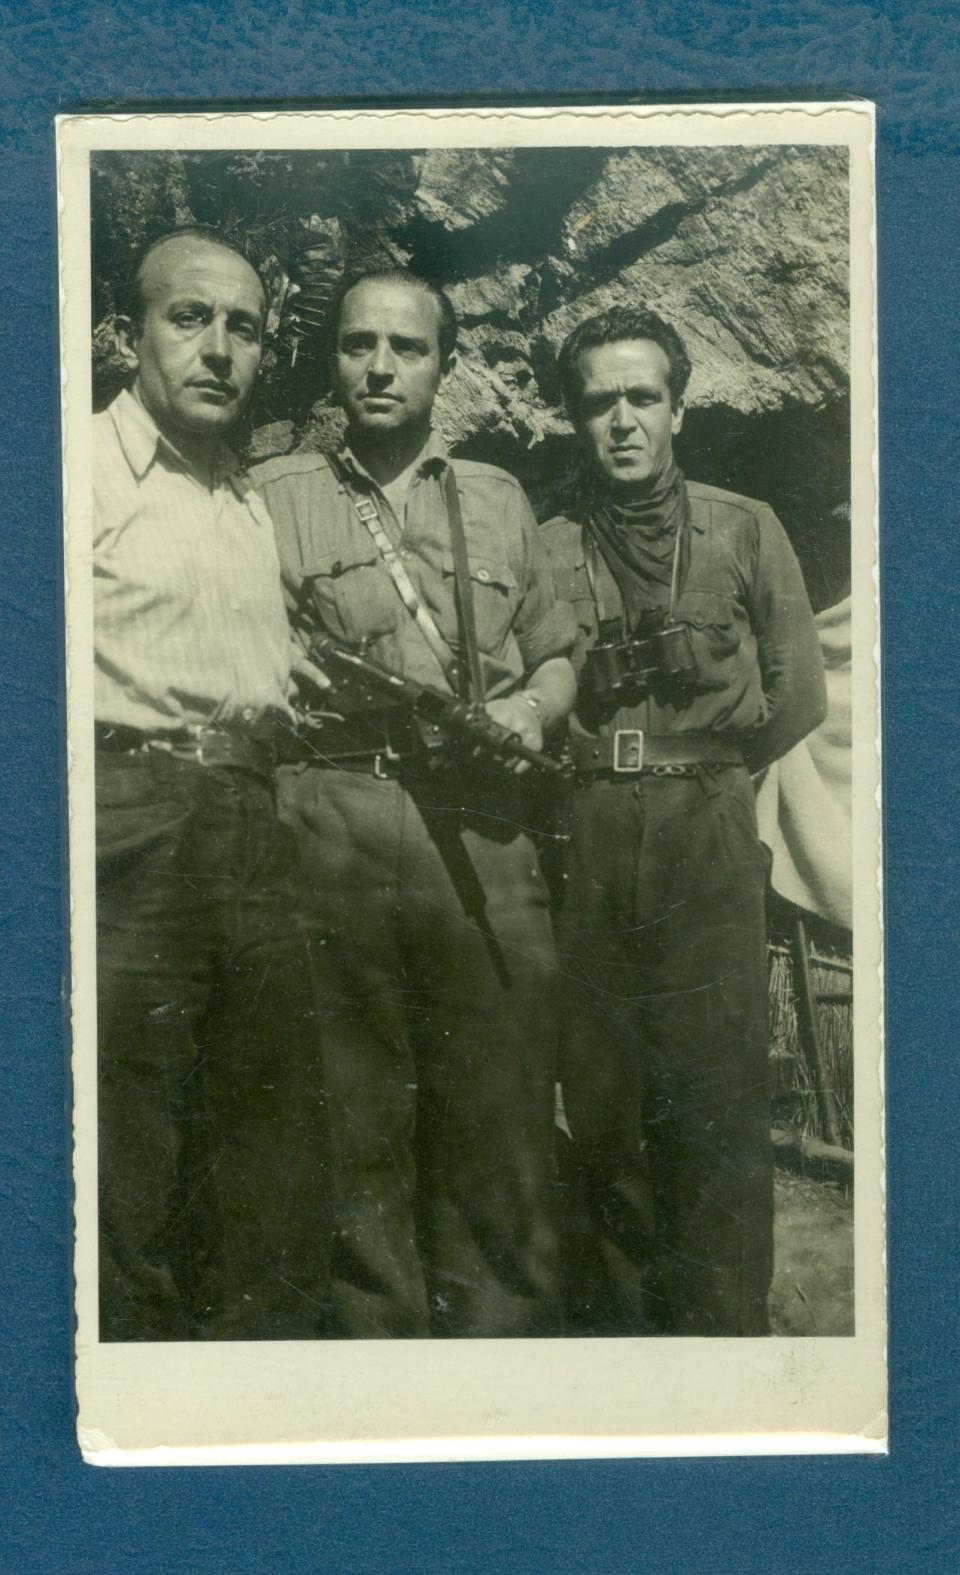 Comandante Enrico (Hermann Wygoda, center) with two members of his command staff in a photo taken in Italy during the war.